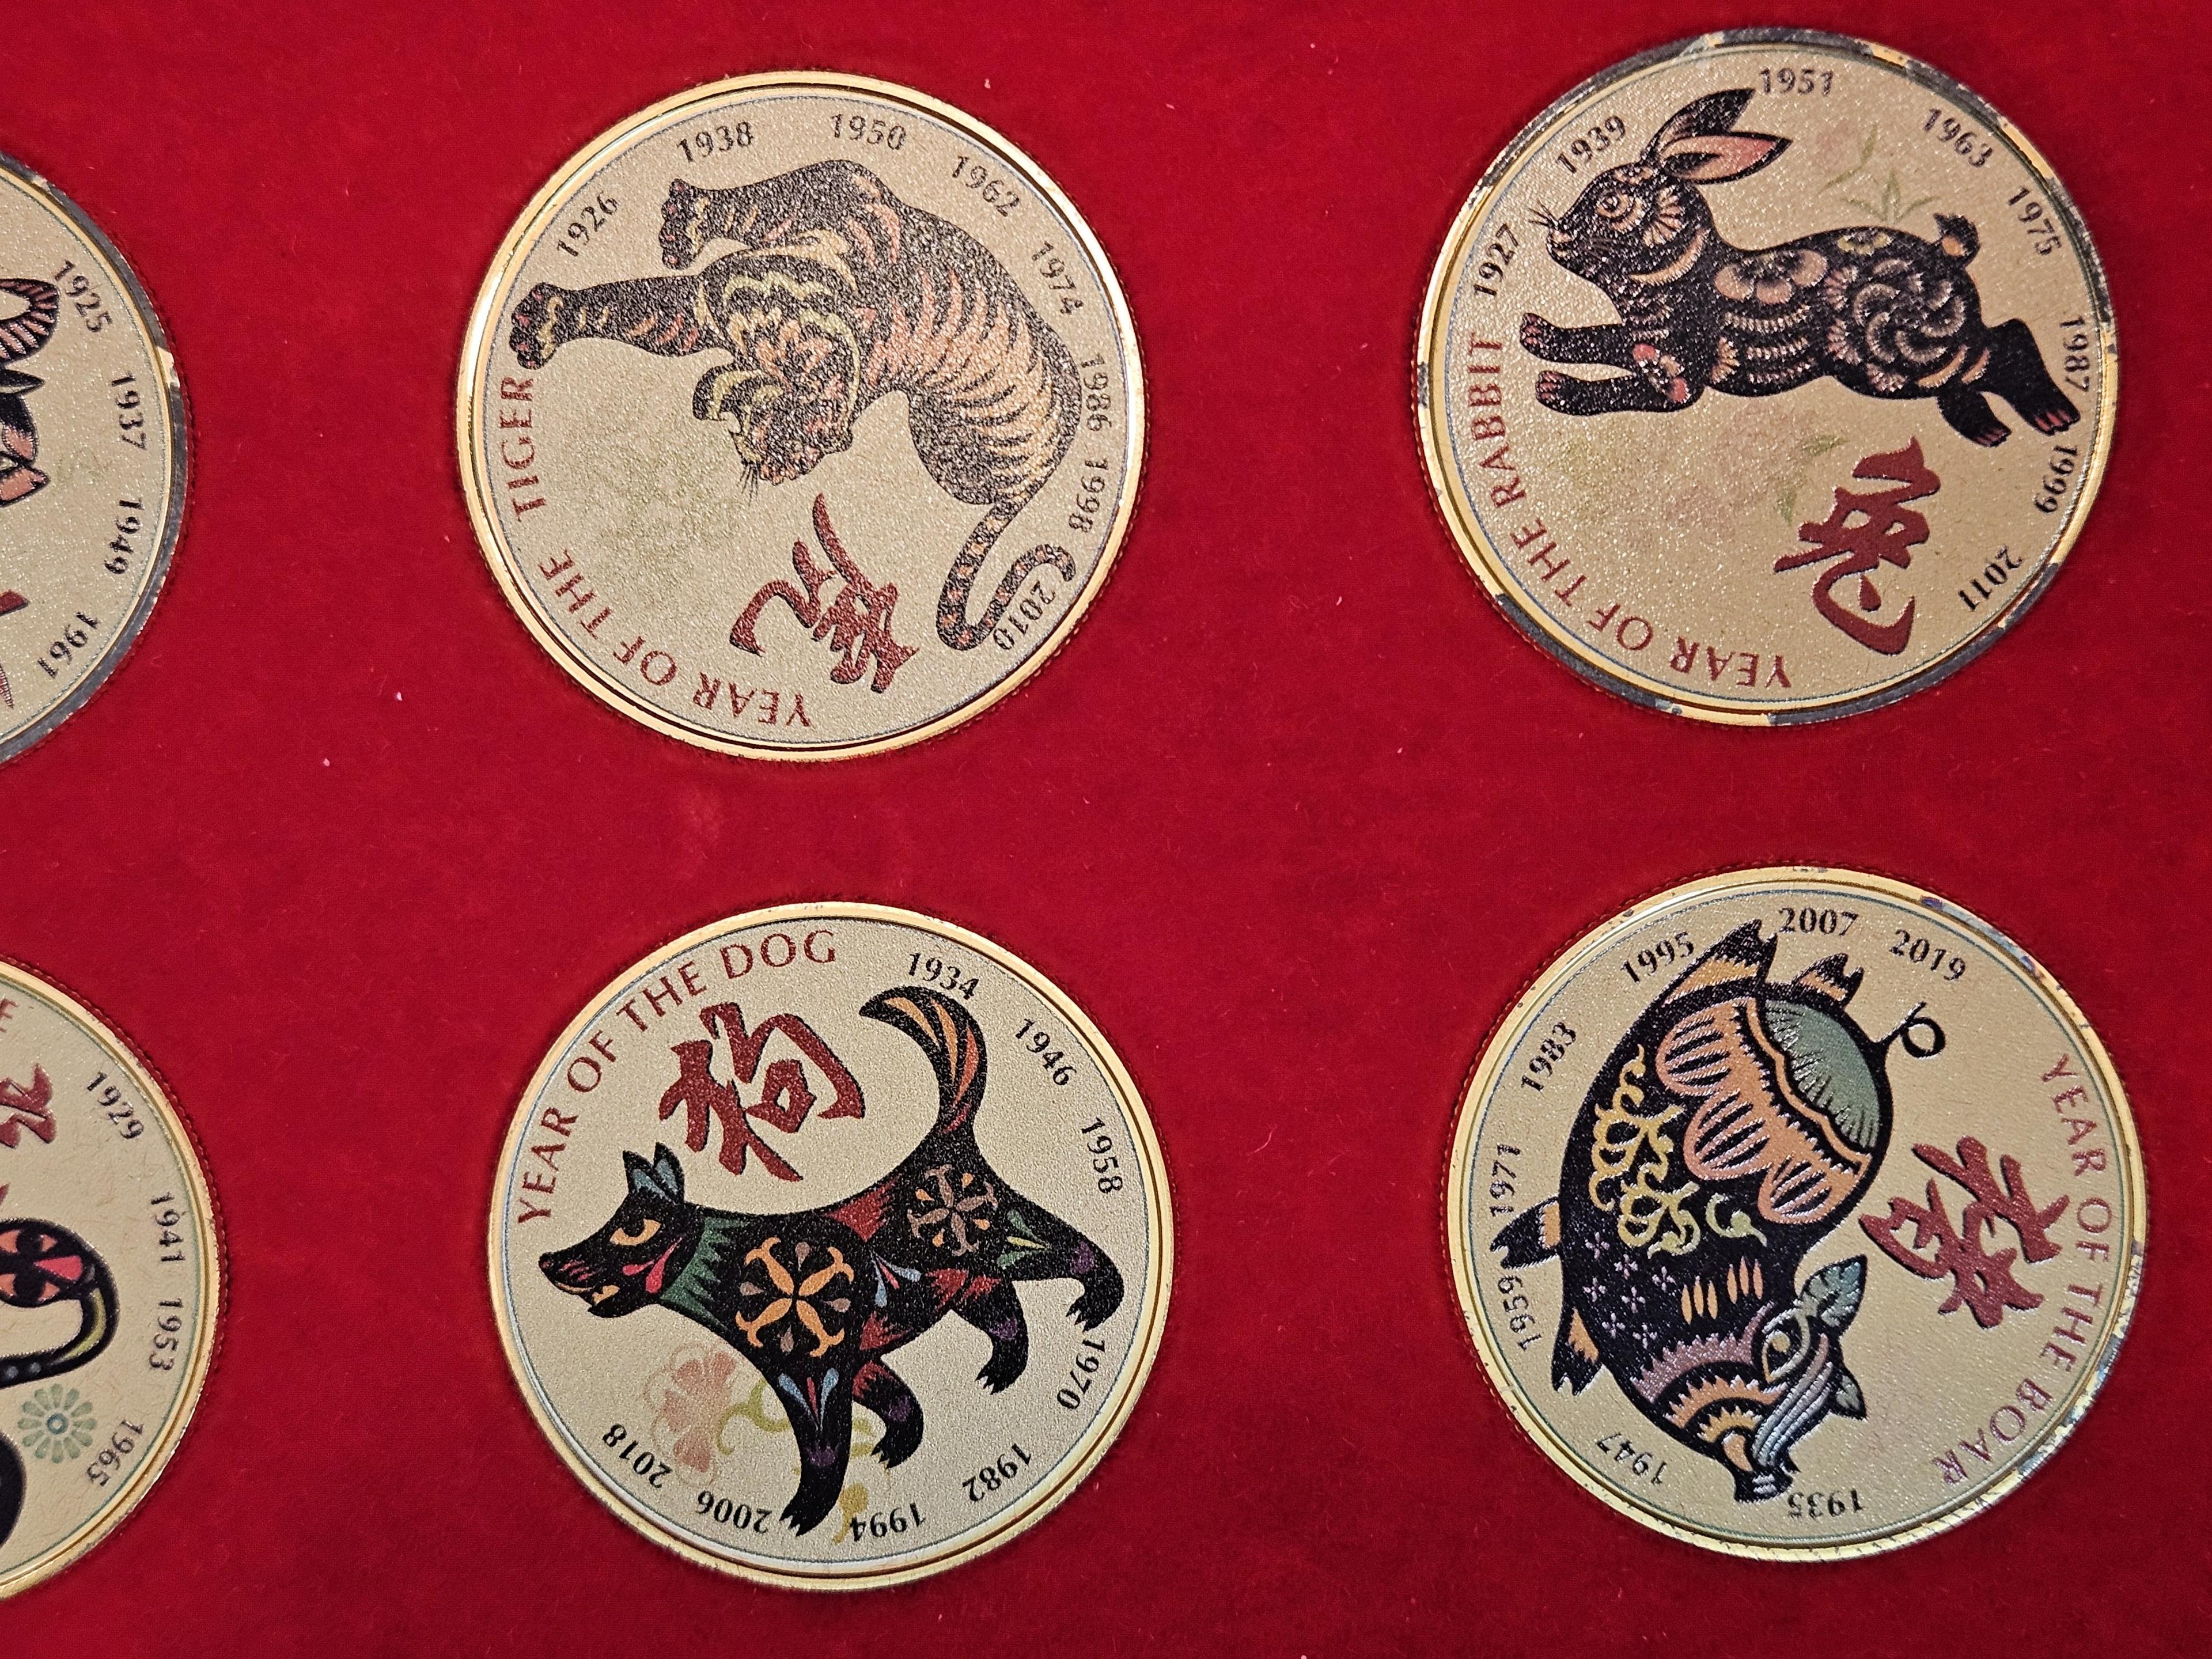 SUPER COOL Twelve SILVER coin Chinese Lunar New Year Collection